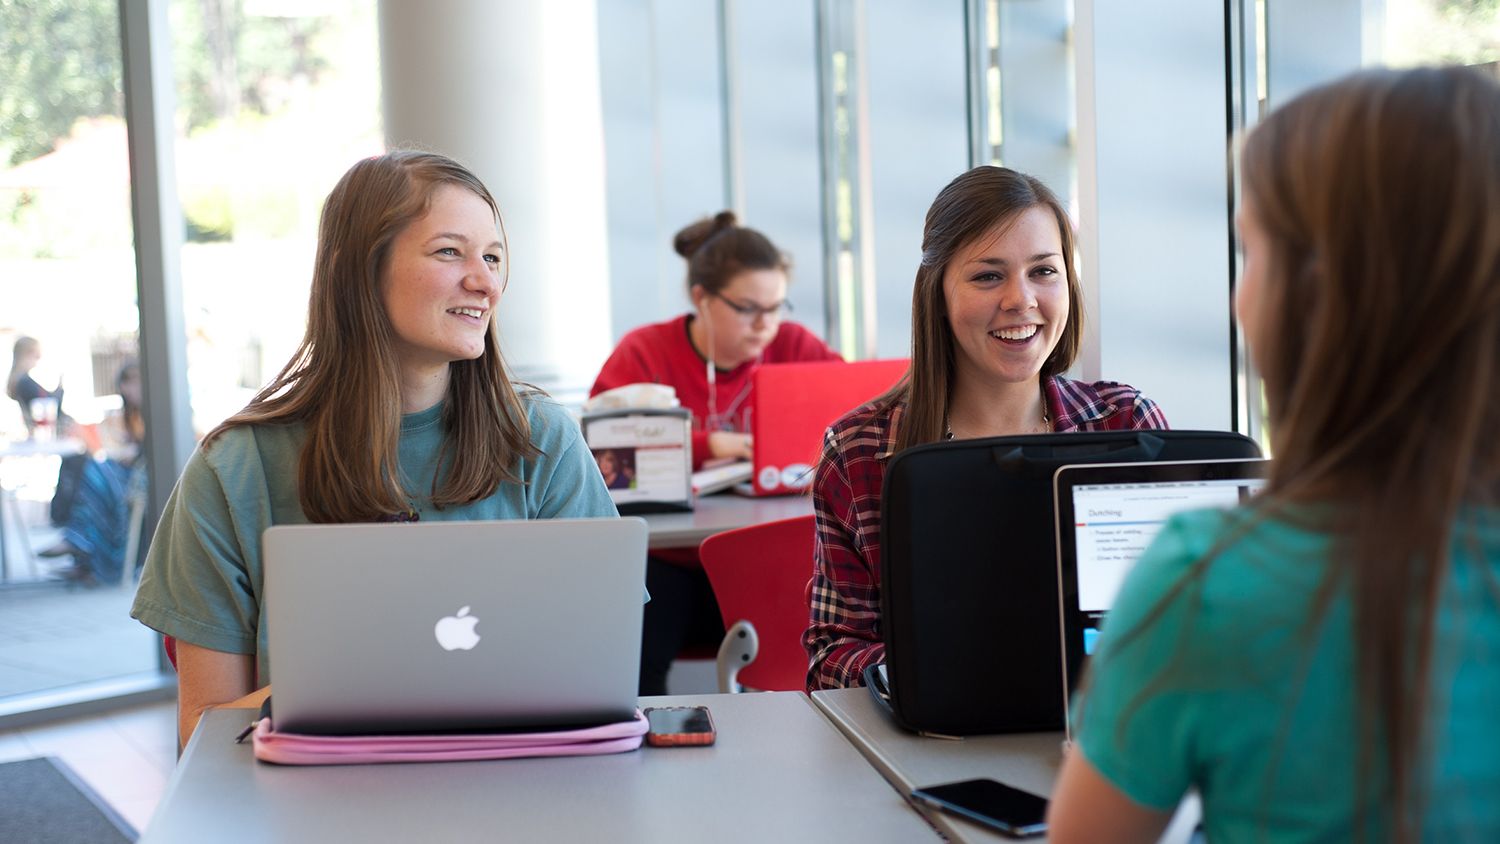 Three female students with laptops laughing in the library.